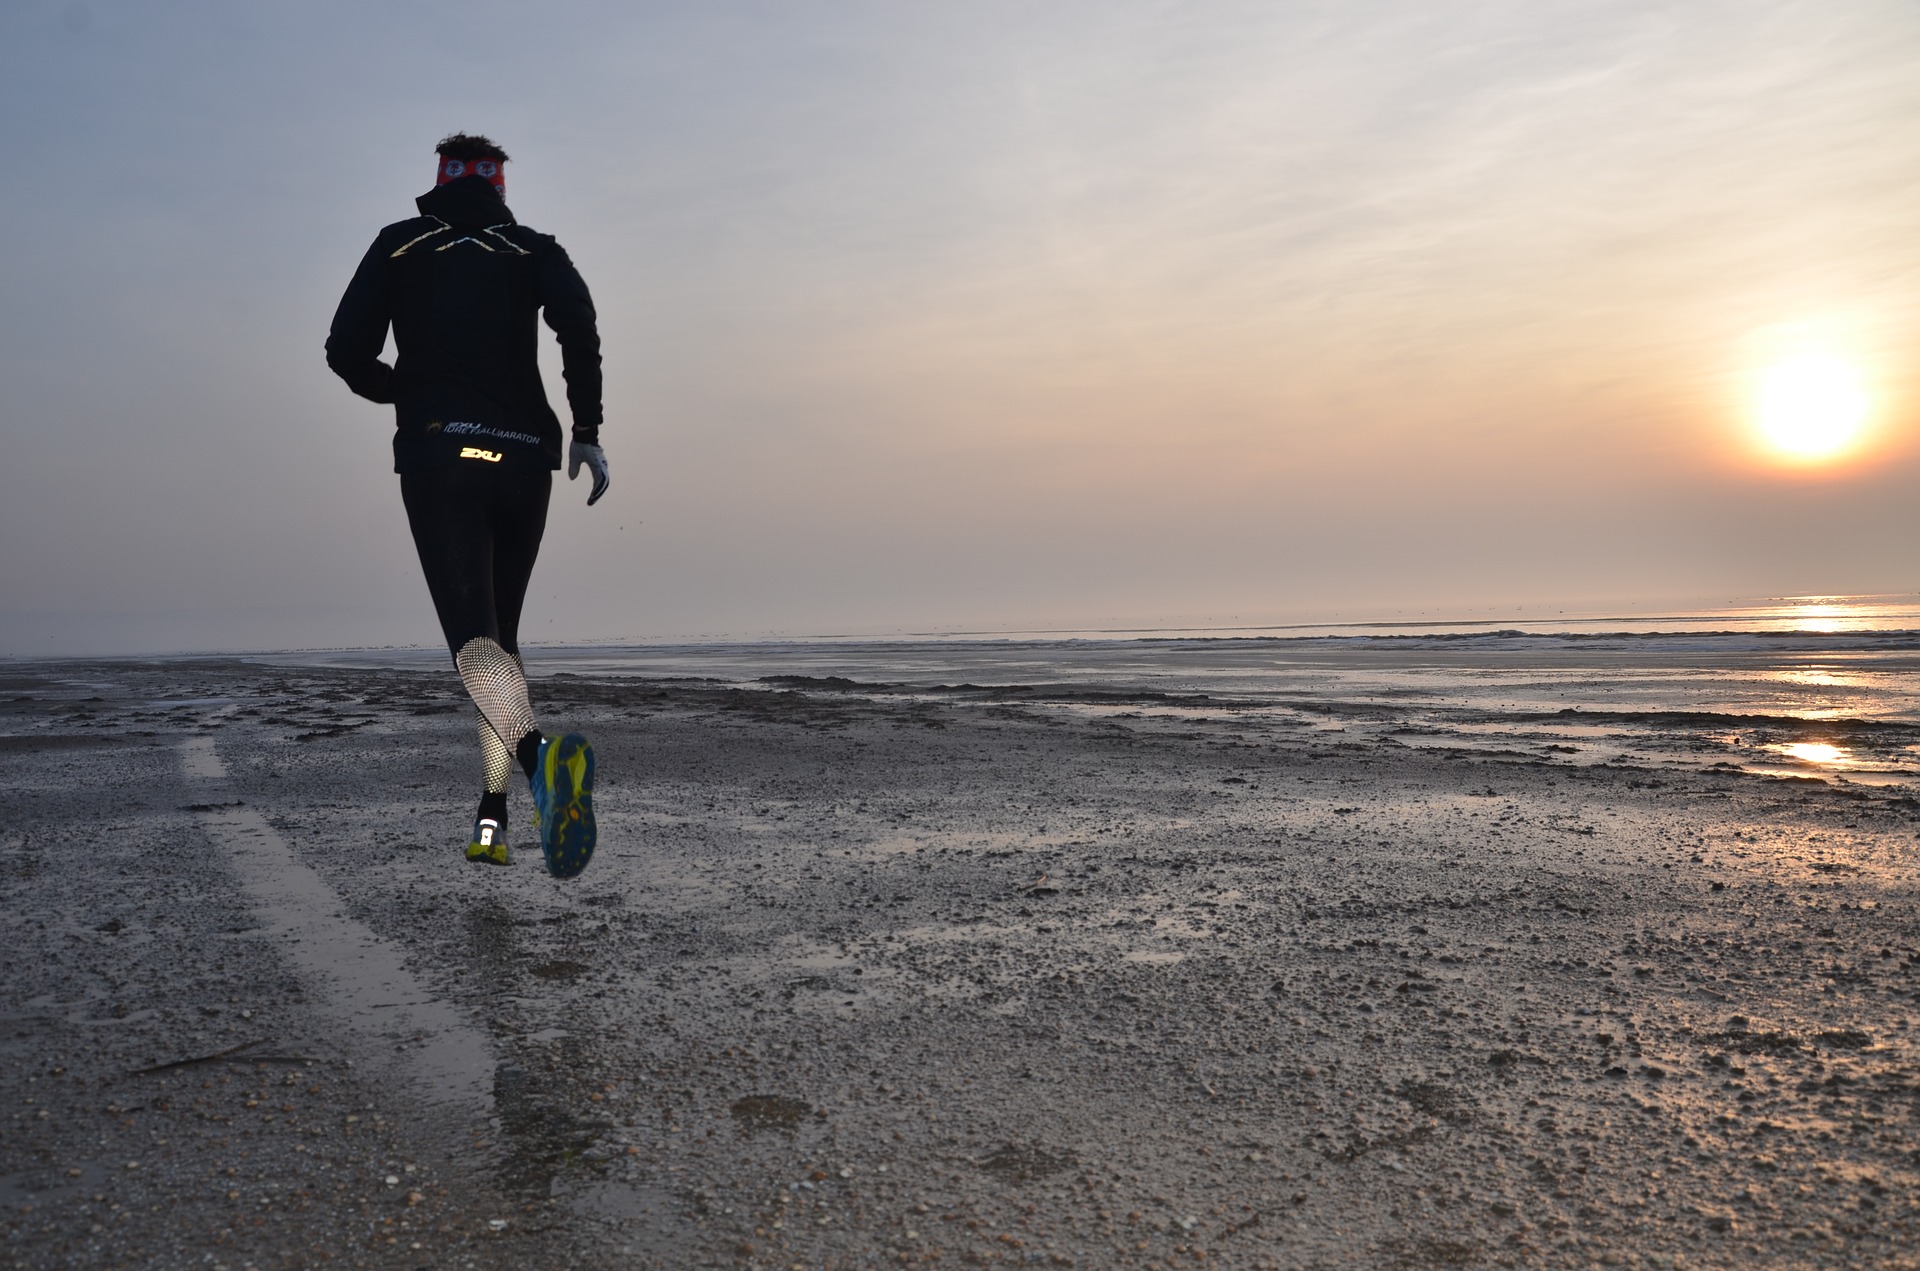 Run Further With These 17 Uncommon Principles // Long Run Living